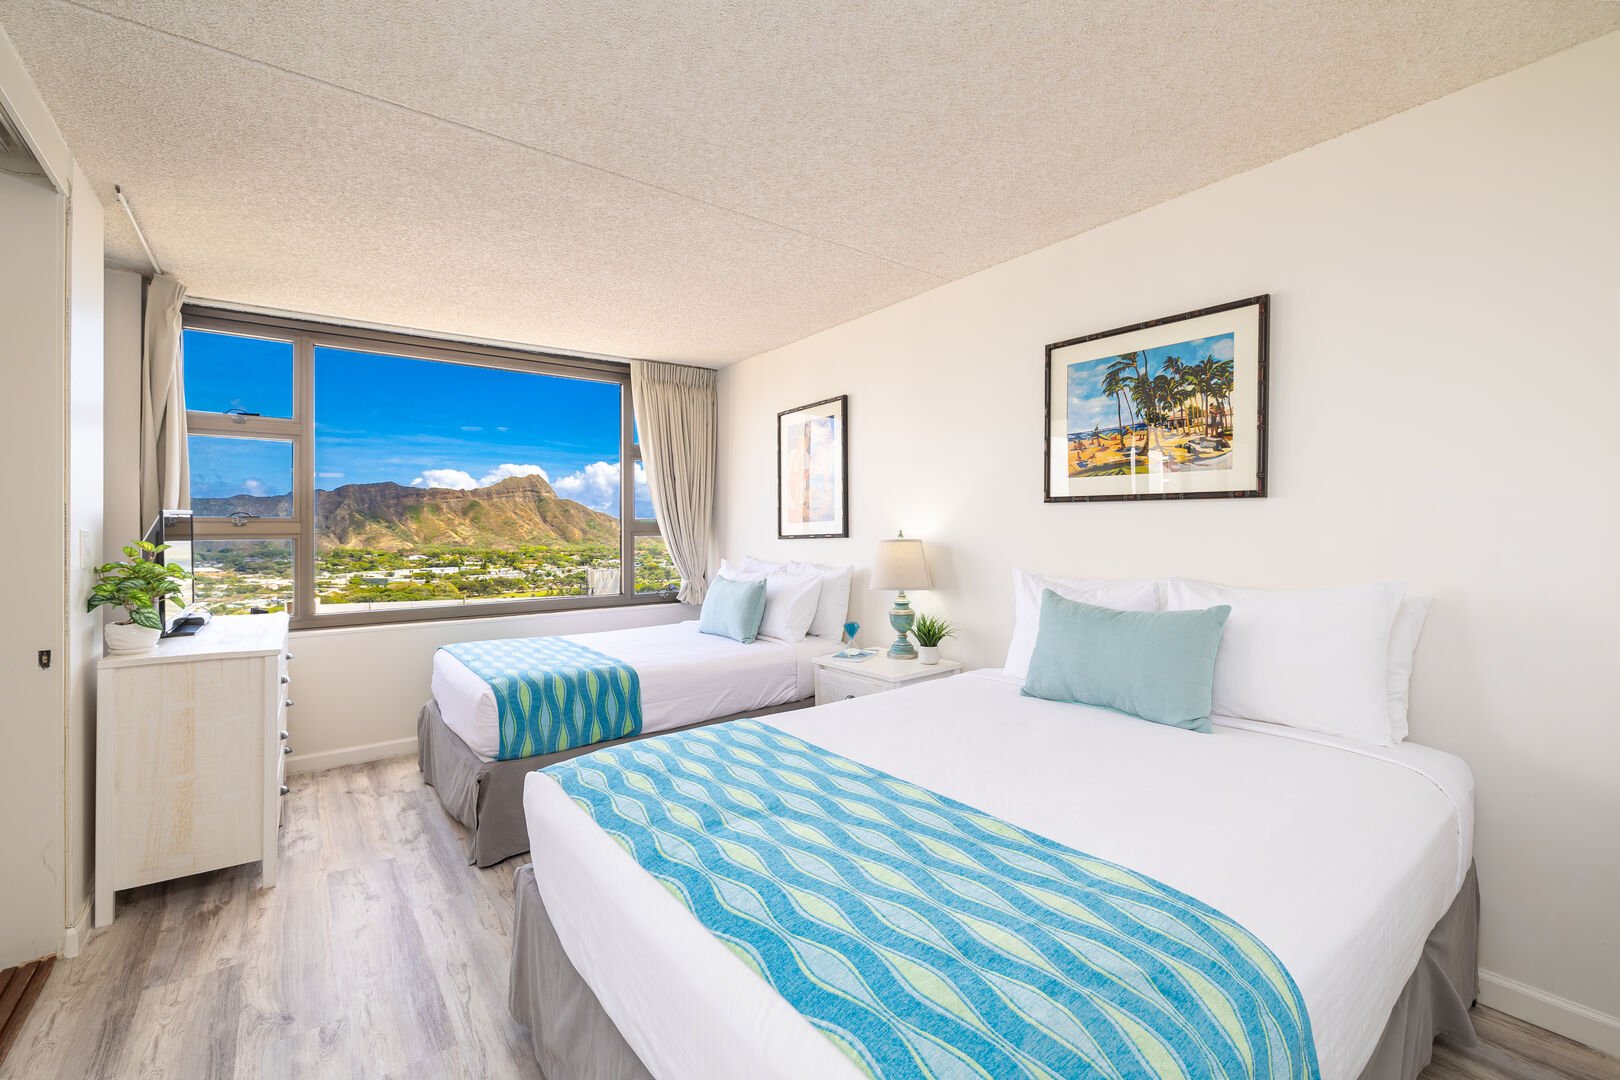 Bedroom with 1 queen size bed and 1 full size bed and Ocean and Diamond Head views from your window!